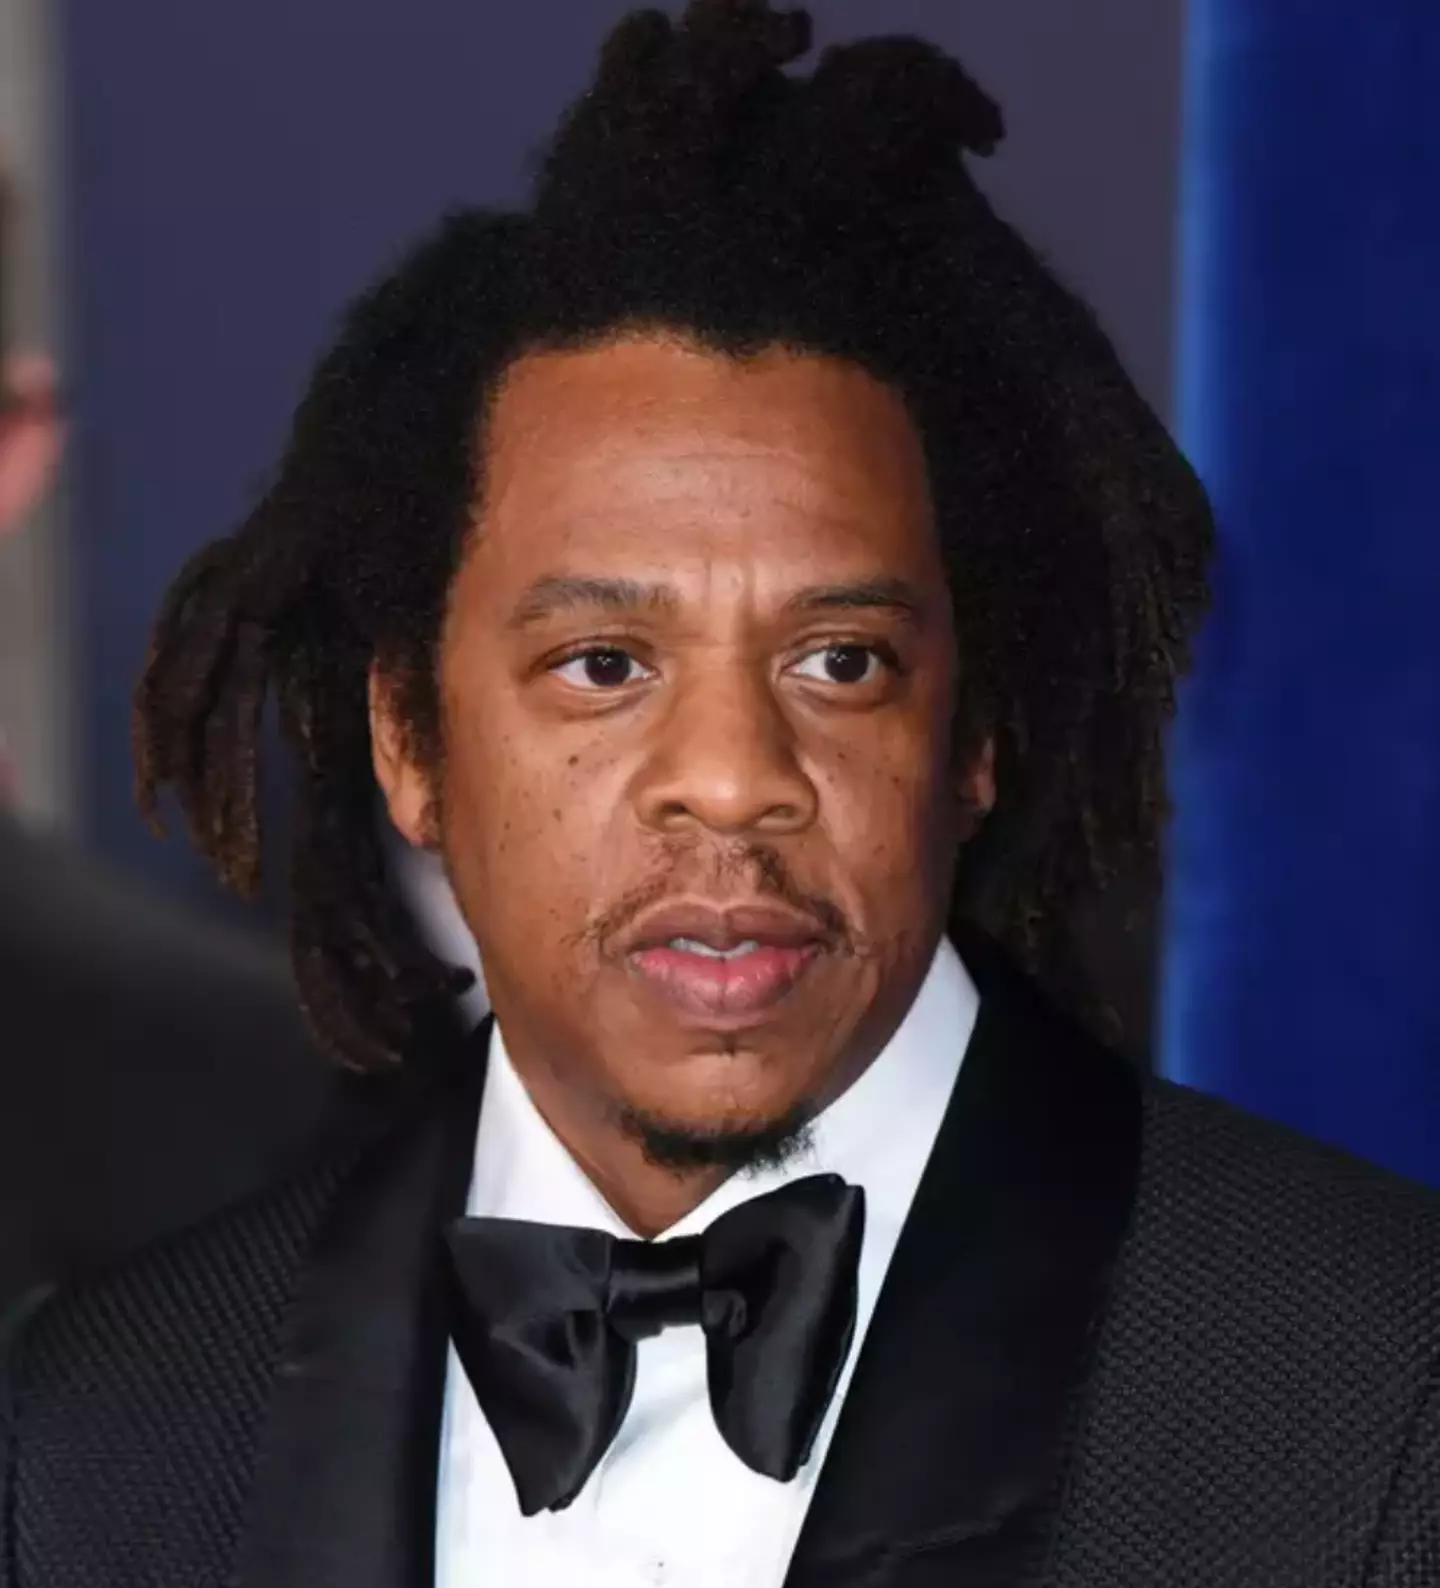 Jay-Z has consistently denied that he's the father.